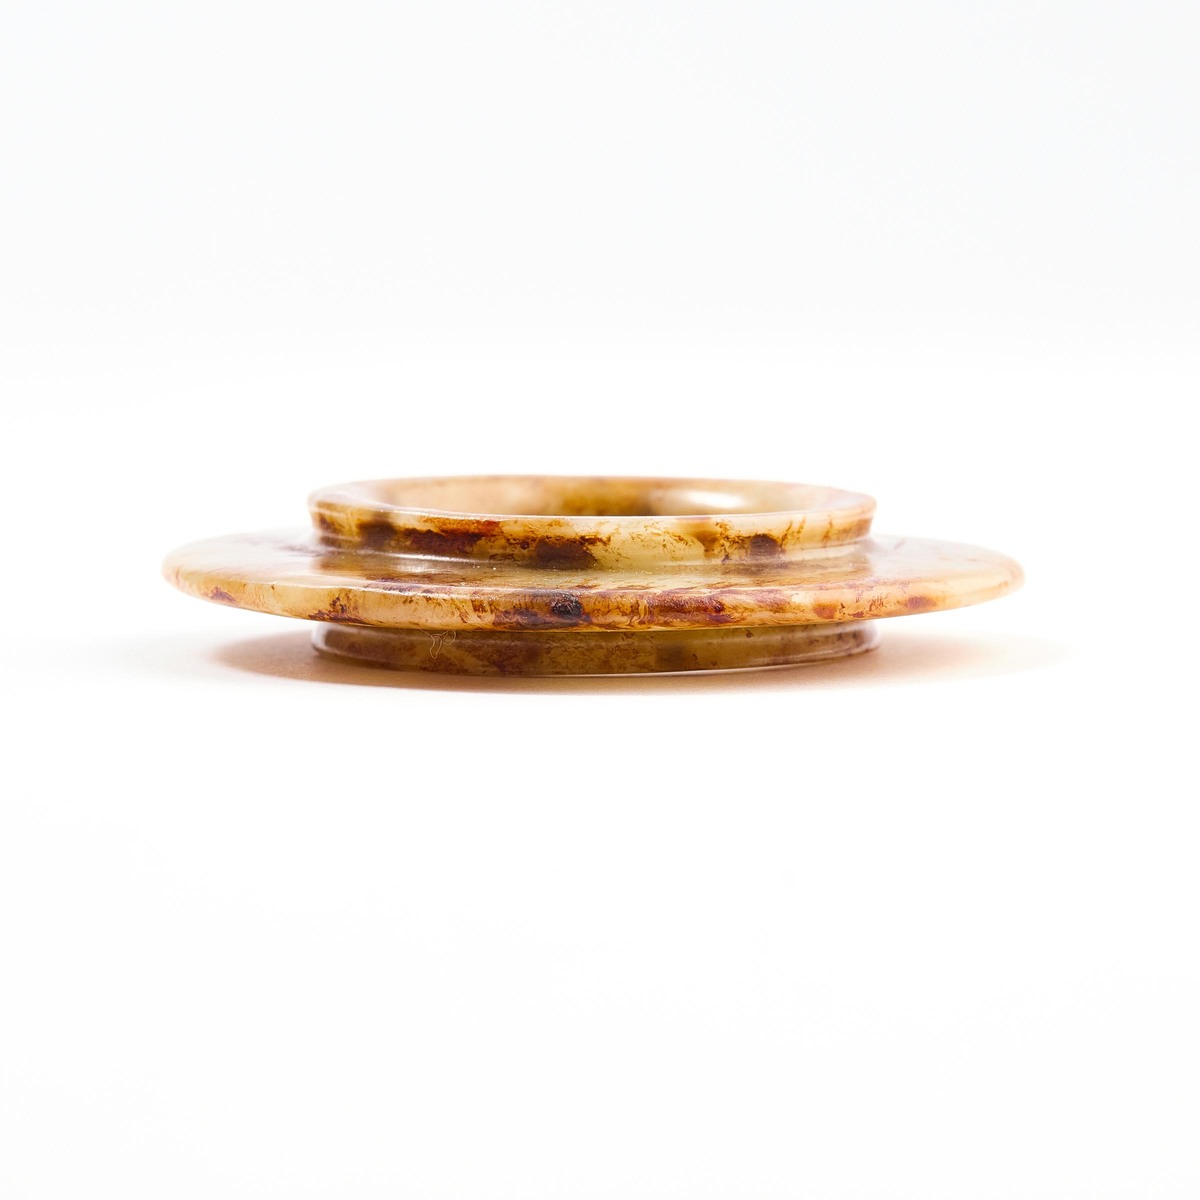 A White and Russet Jade Ring-Shaped Ornament, Song-Ming Dynasty (960-1644), 宋/明 白玉带皮凸唇环, diameter 2. - Image 6 of 7